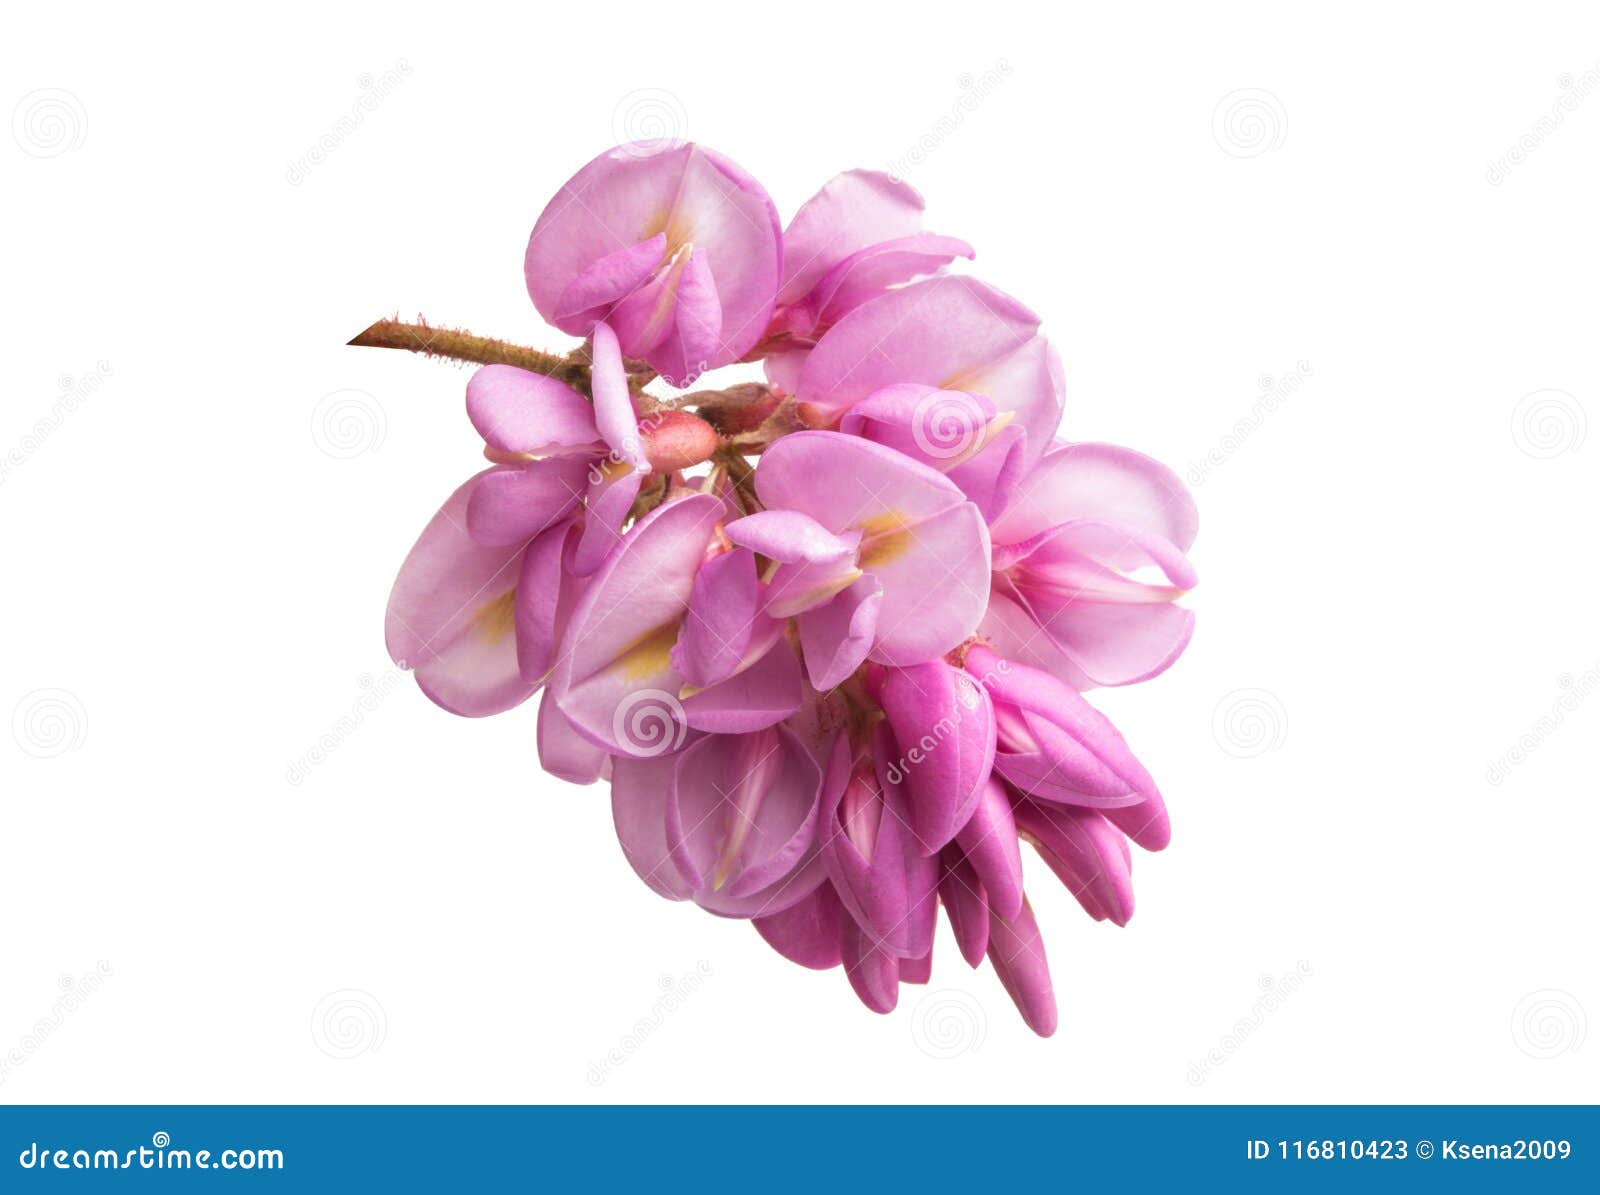 Acacia Flower Lilac Isolated Stock Image - Image of isolated, beauty